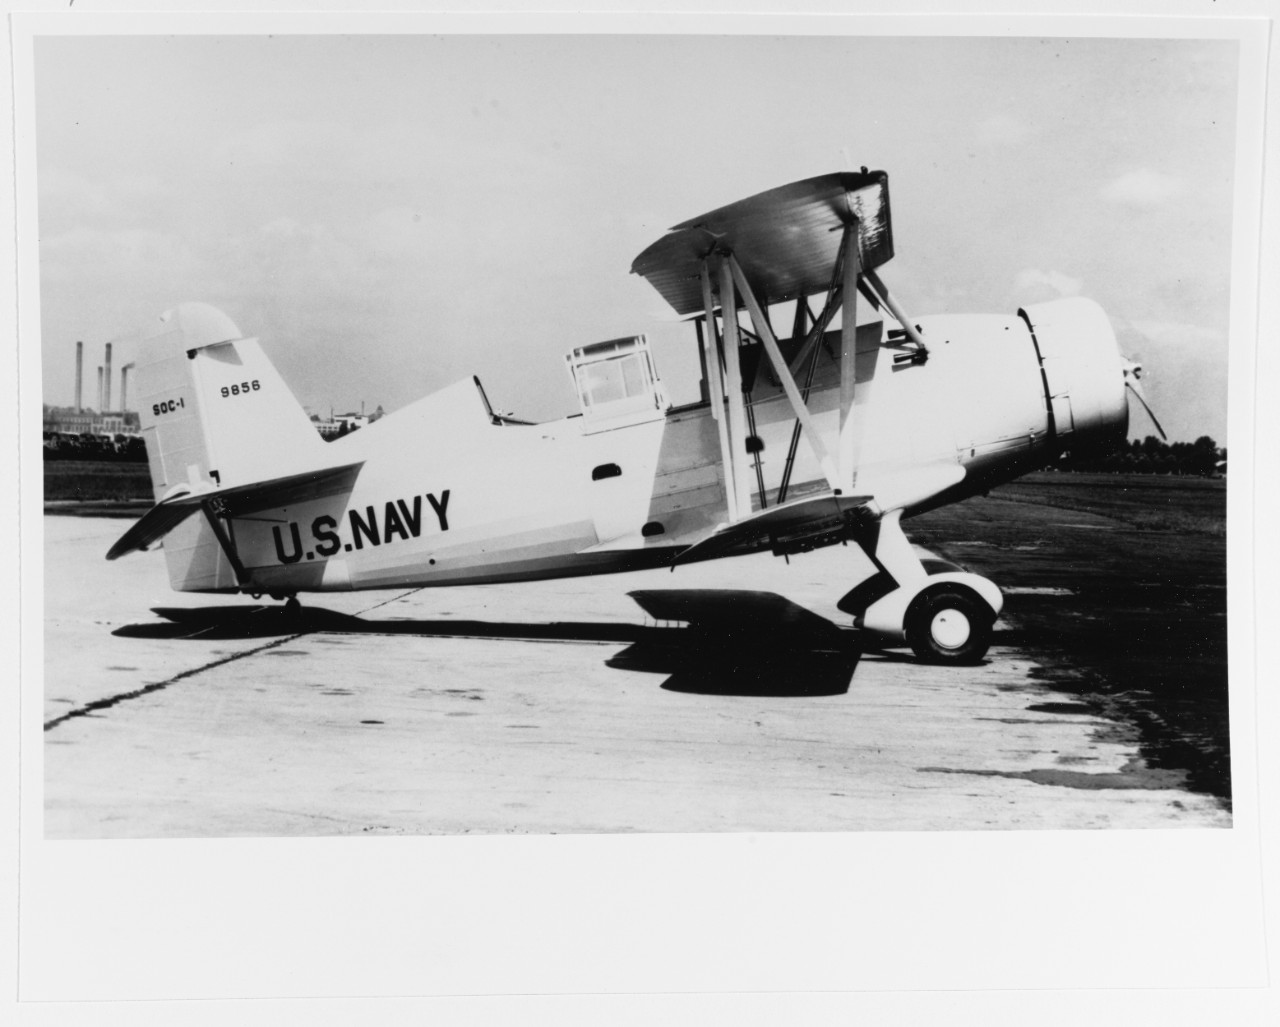 Photo #: 80-G-5852  Curtiss SOC-1 scout-observation aircraft